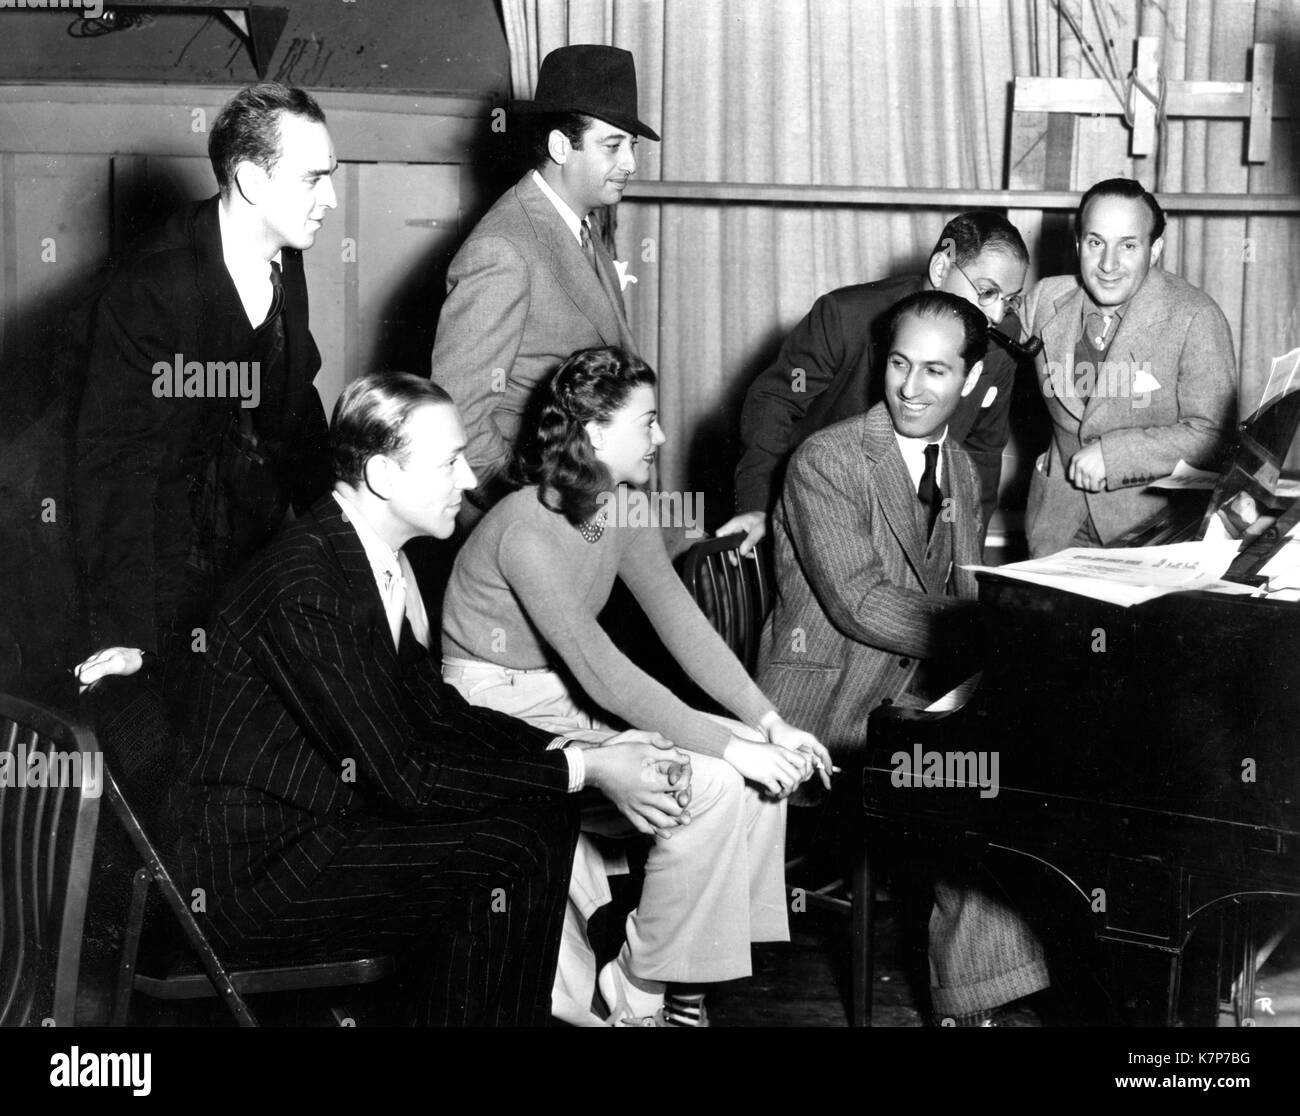 george gershwin usually collaborated with the lyricist